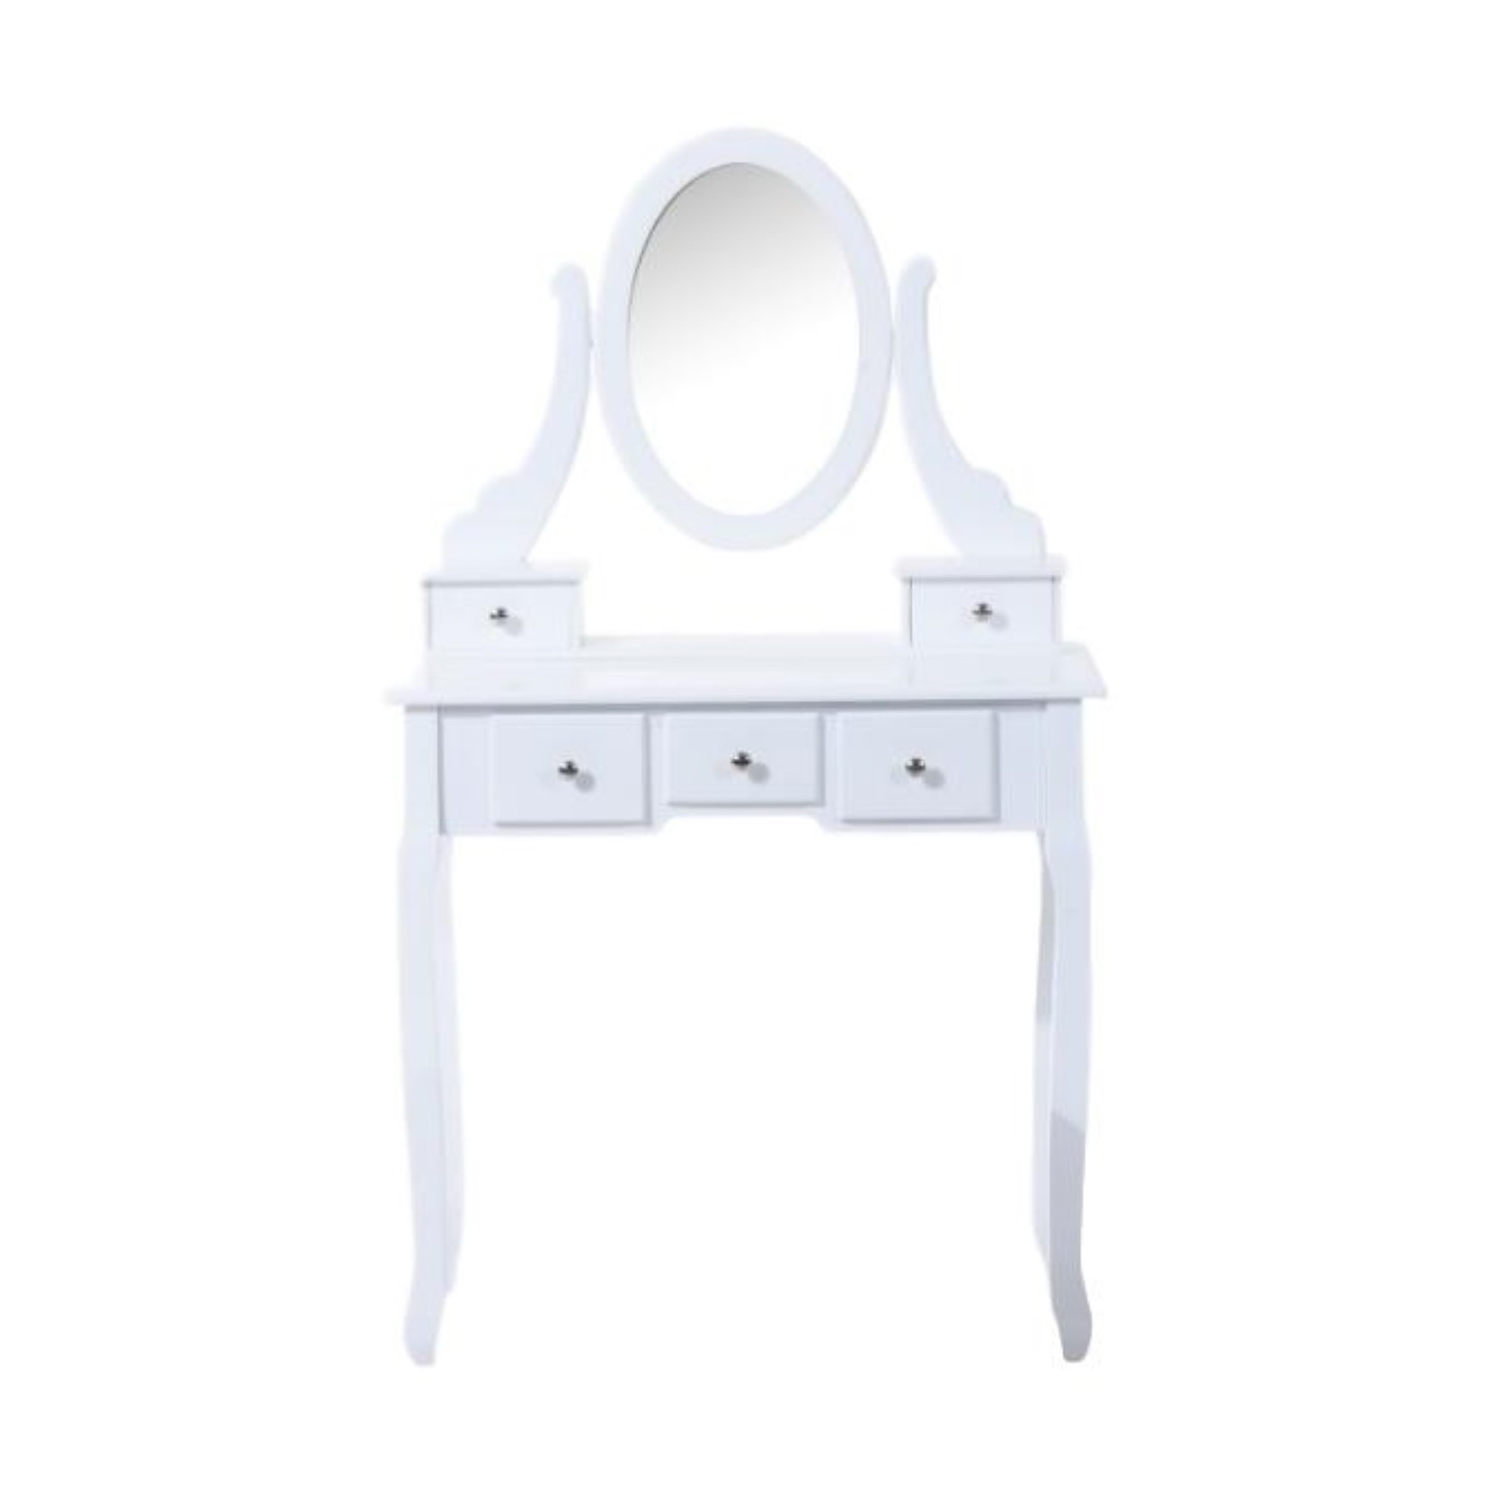 Viscologic Ivory Wooden Mirrored Makeup, Viscologic Ivory Wooden Mirrored Makeup Vanity Table